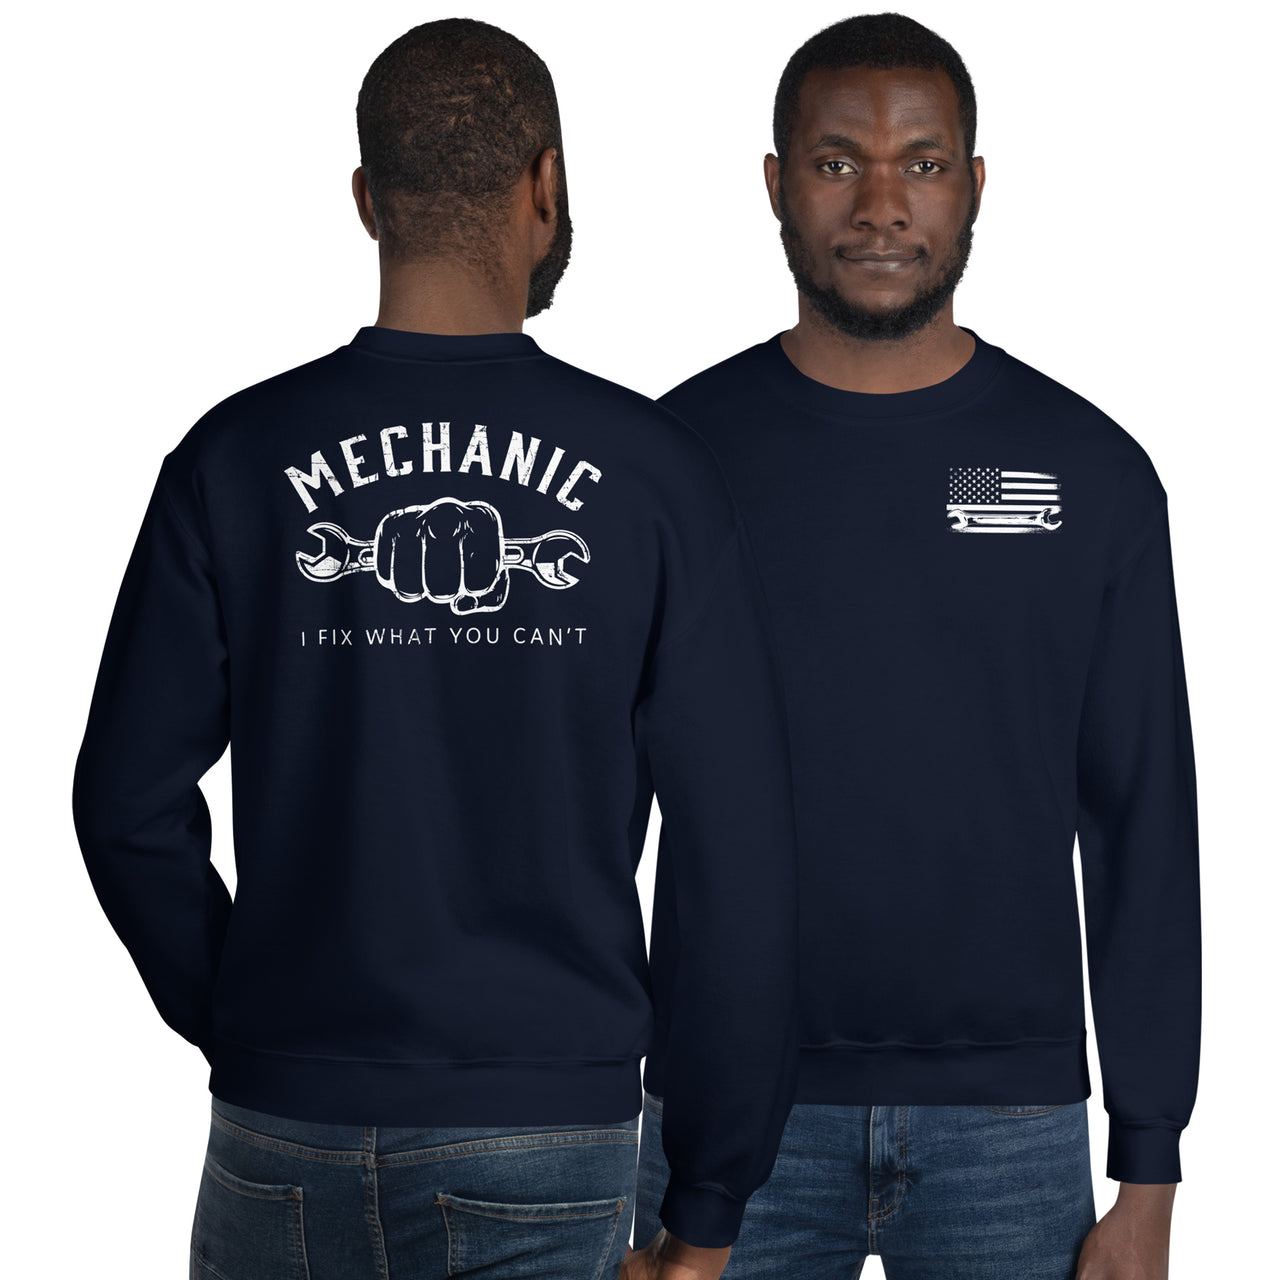 Mechanic Sweatshirt - I Fix What You Cant - Crew Neck - modeled in navy